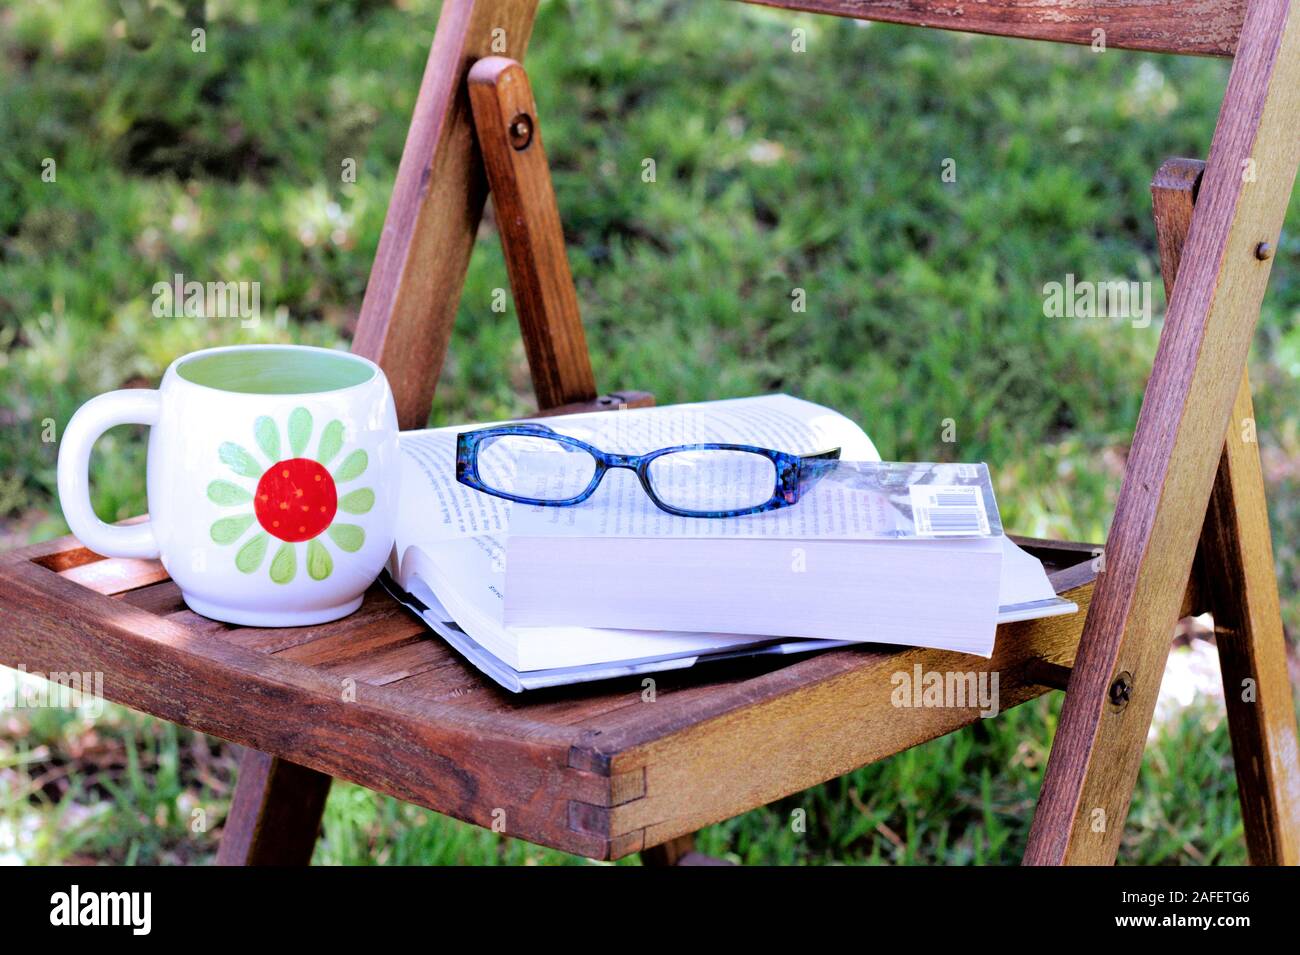 Books rest on wooden slat chair in dappled shade with reading glasses and coffee mug. Stock Photo